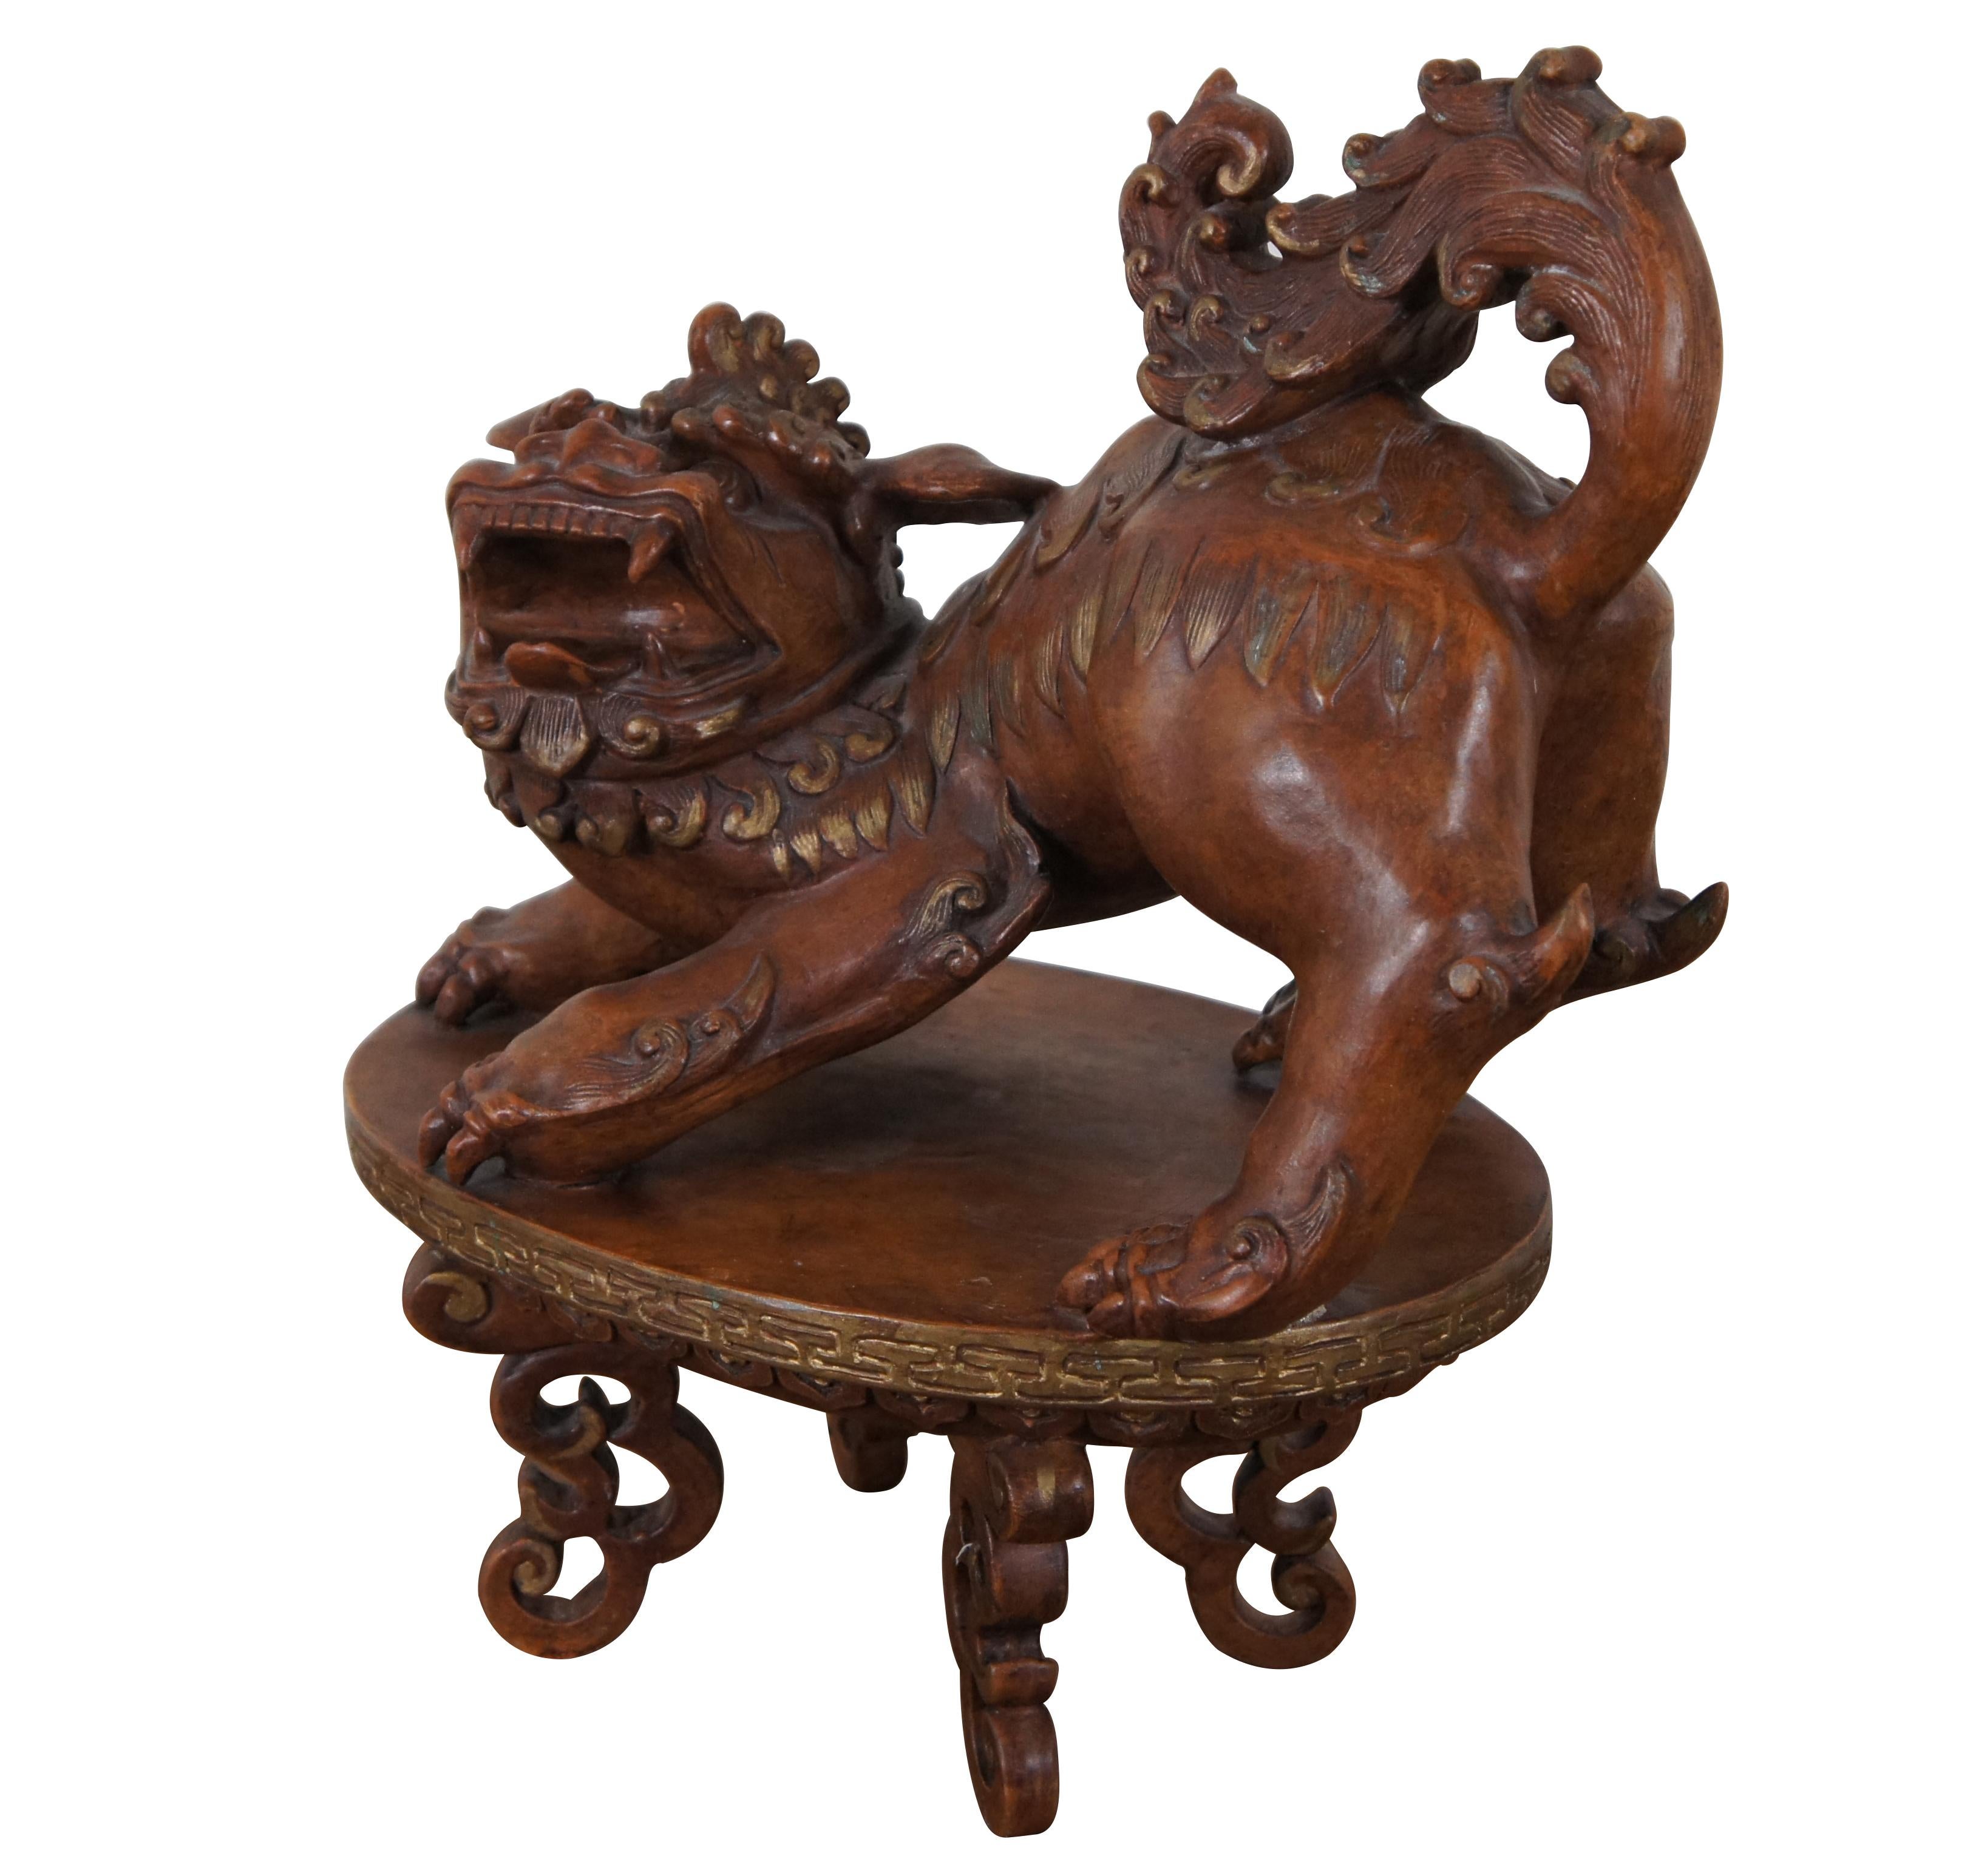 Chinoiserie Vintage Italian Chalkware Fu Foo Dog Chinese Guardian Lion Sculpture Centerpiece For Sale